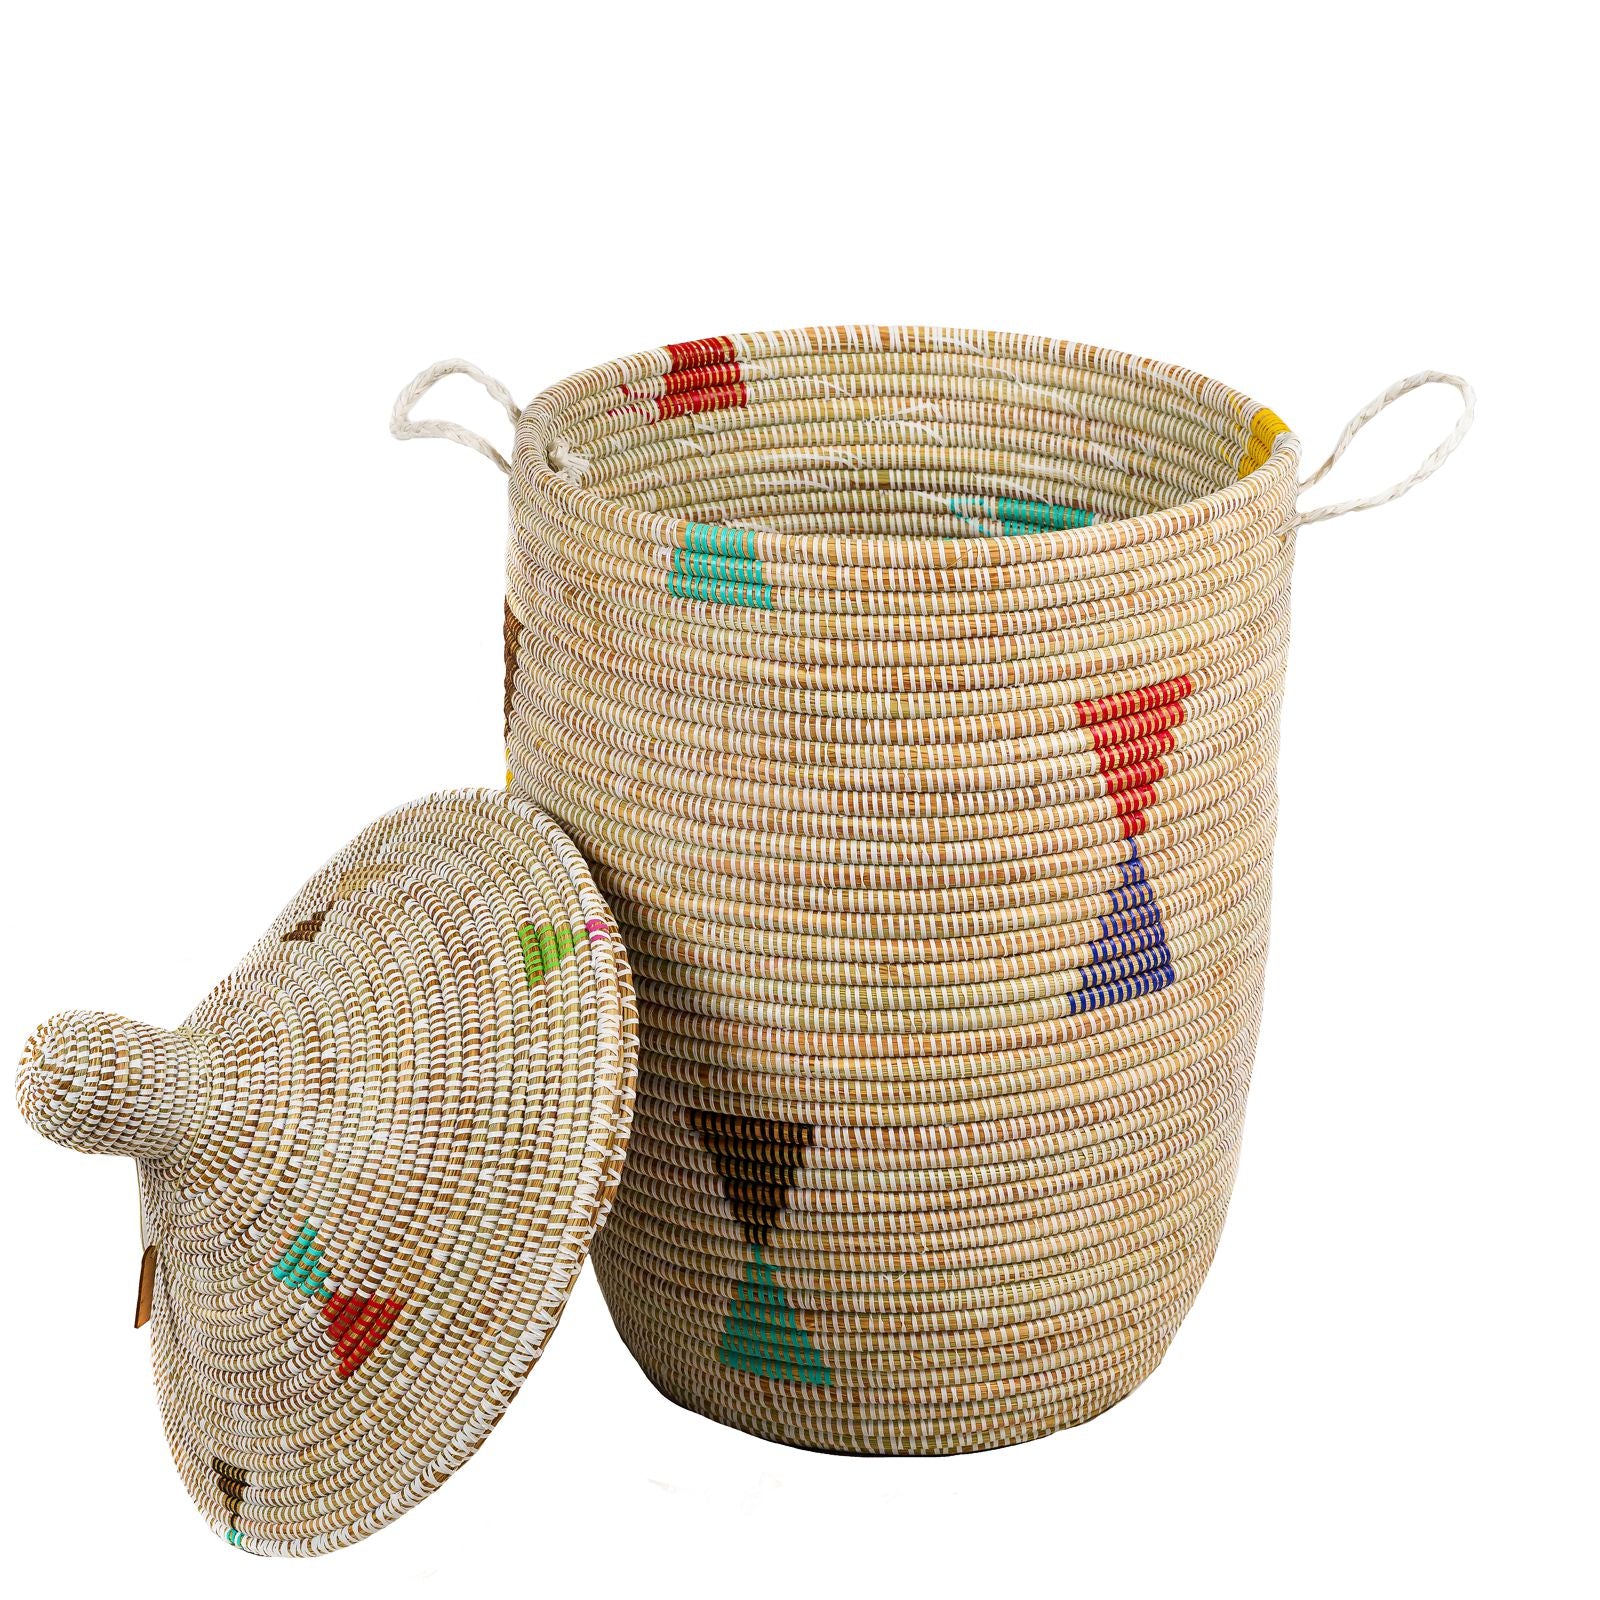 Set: African laundry baskets with lids - white / colorful